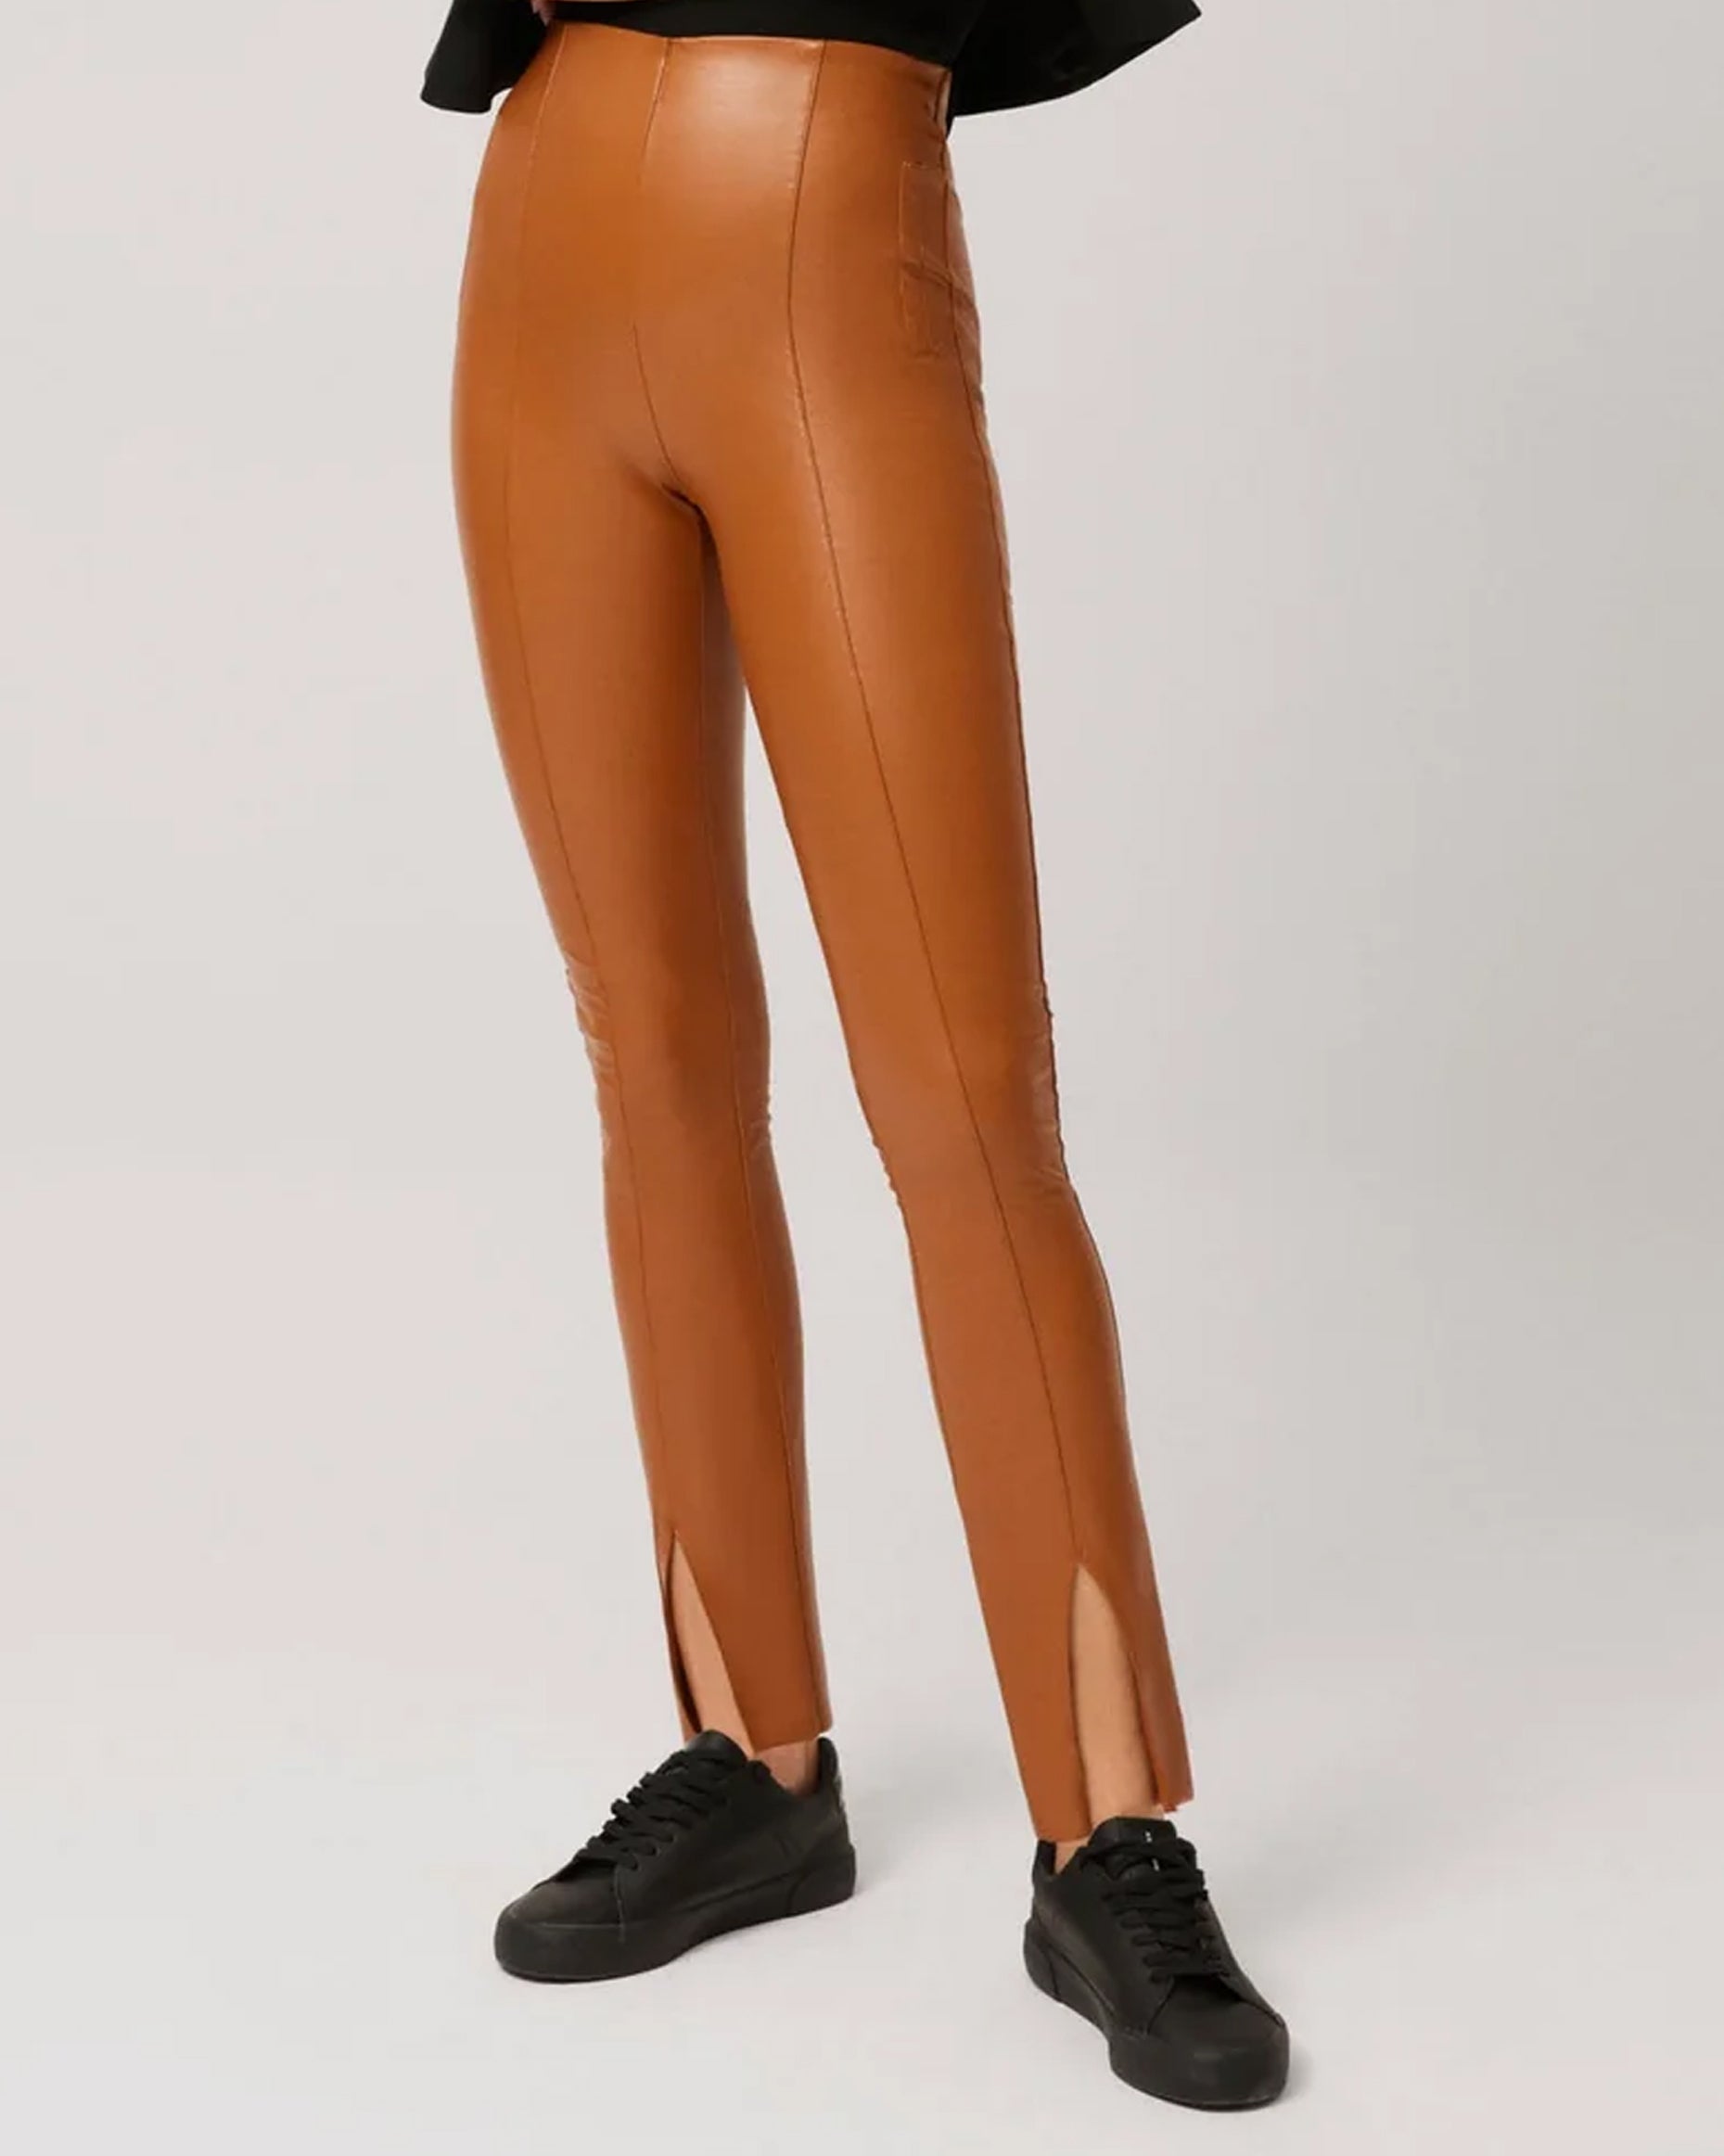 Ysabel Mora 70295 Faux Leather Slit Leggings - Tight fit faux leather thermal camel coloured leggings with a warm plush fleece lining, faux side pocket stitching, centre seam down the front of the leg with a slit opening at the cuff, worn with black sneakers.